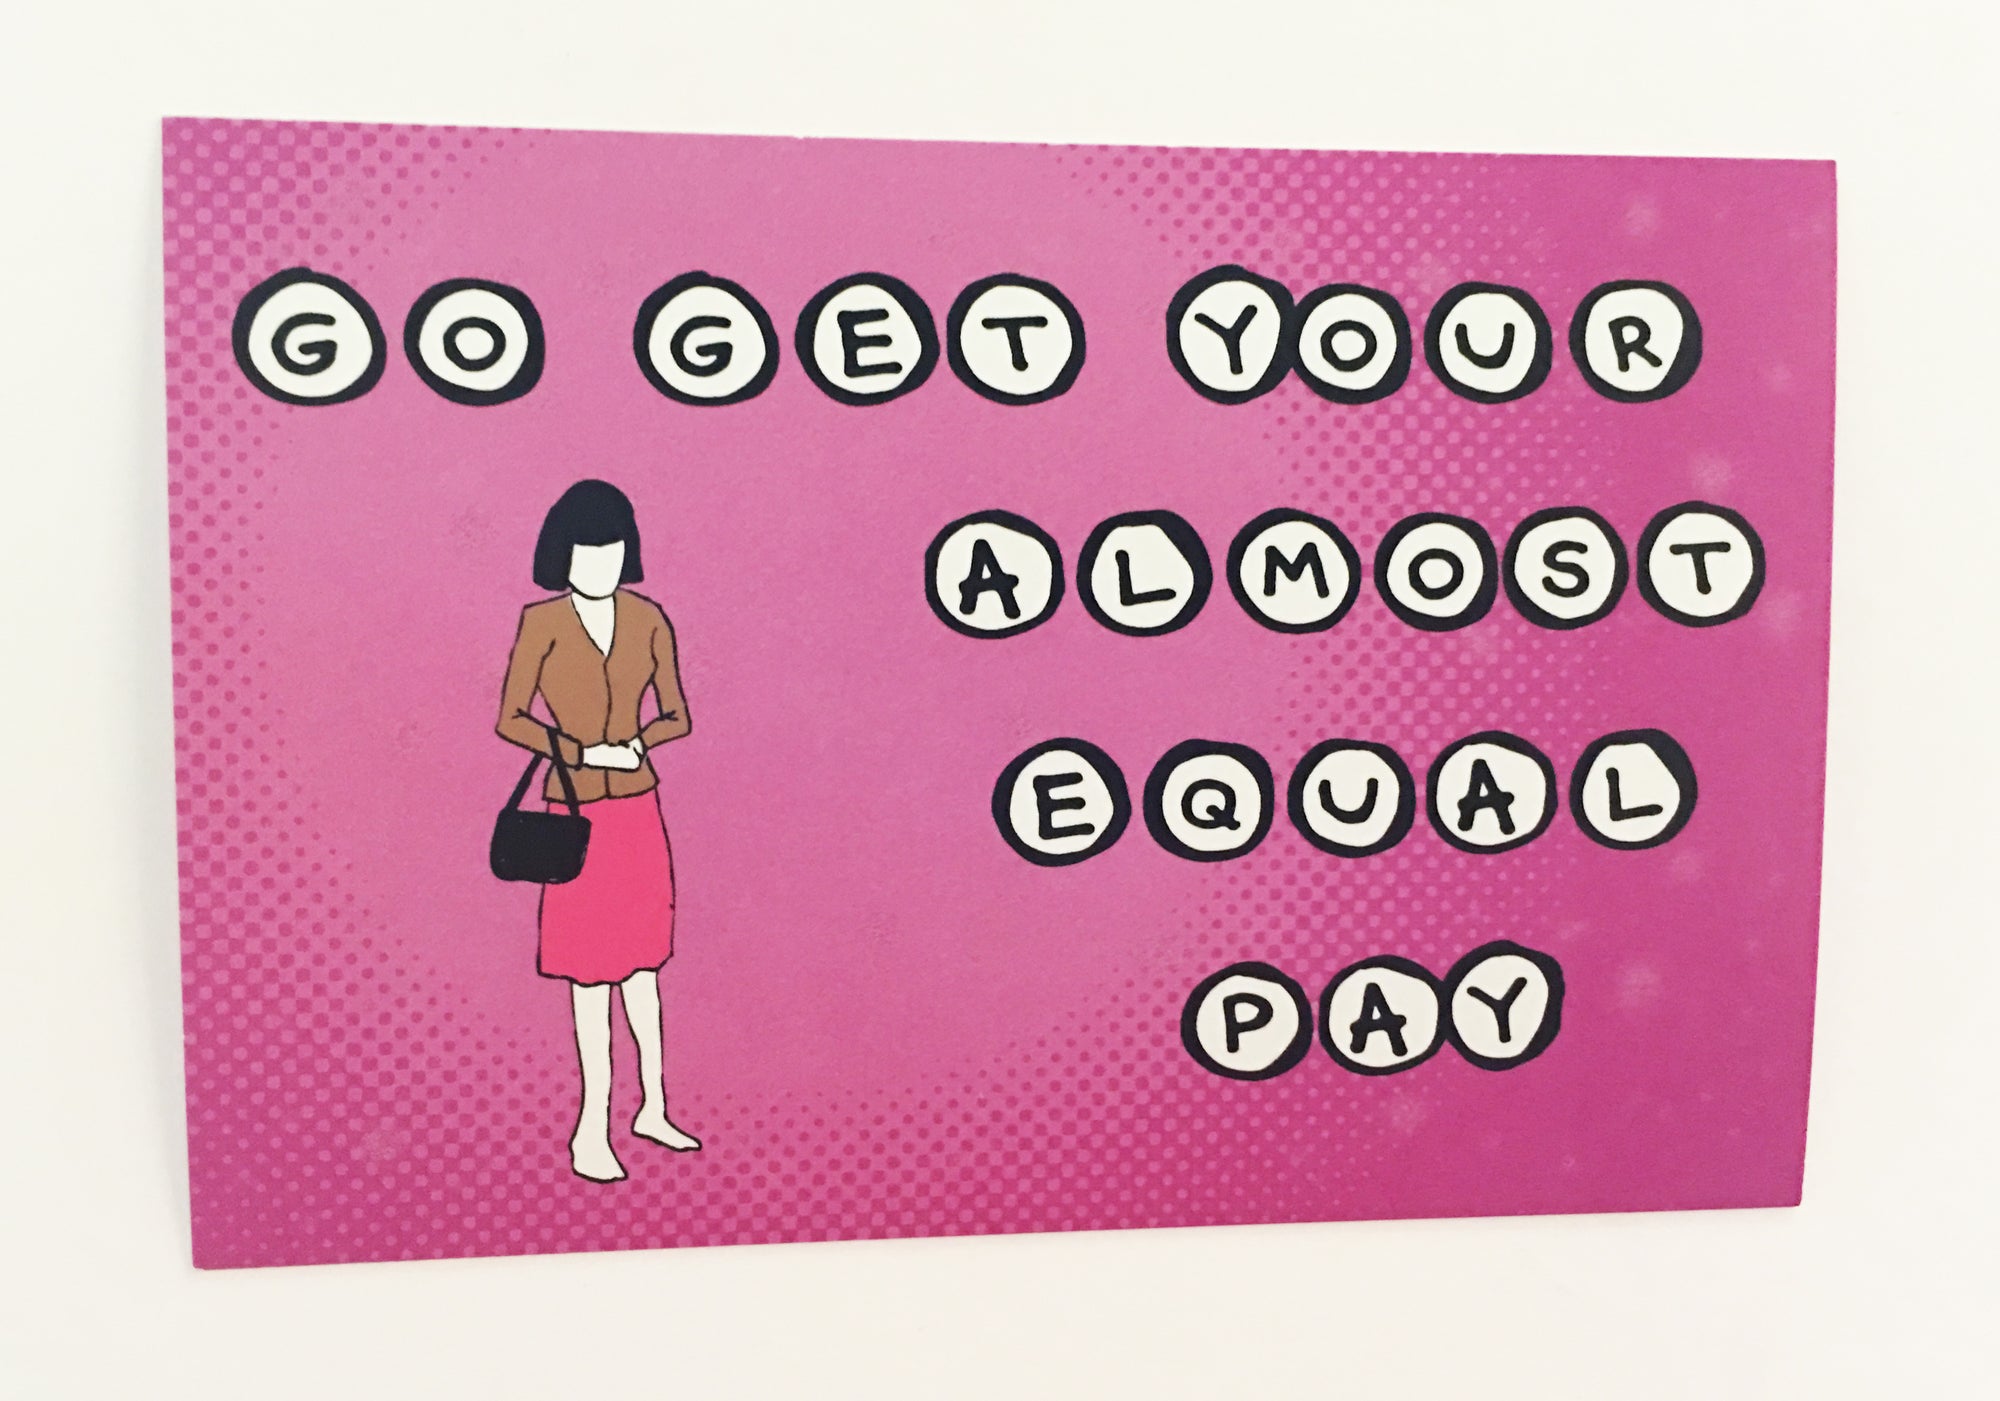 Postcard: Go Get Your Almost Equal Pay - Ten Pack